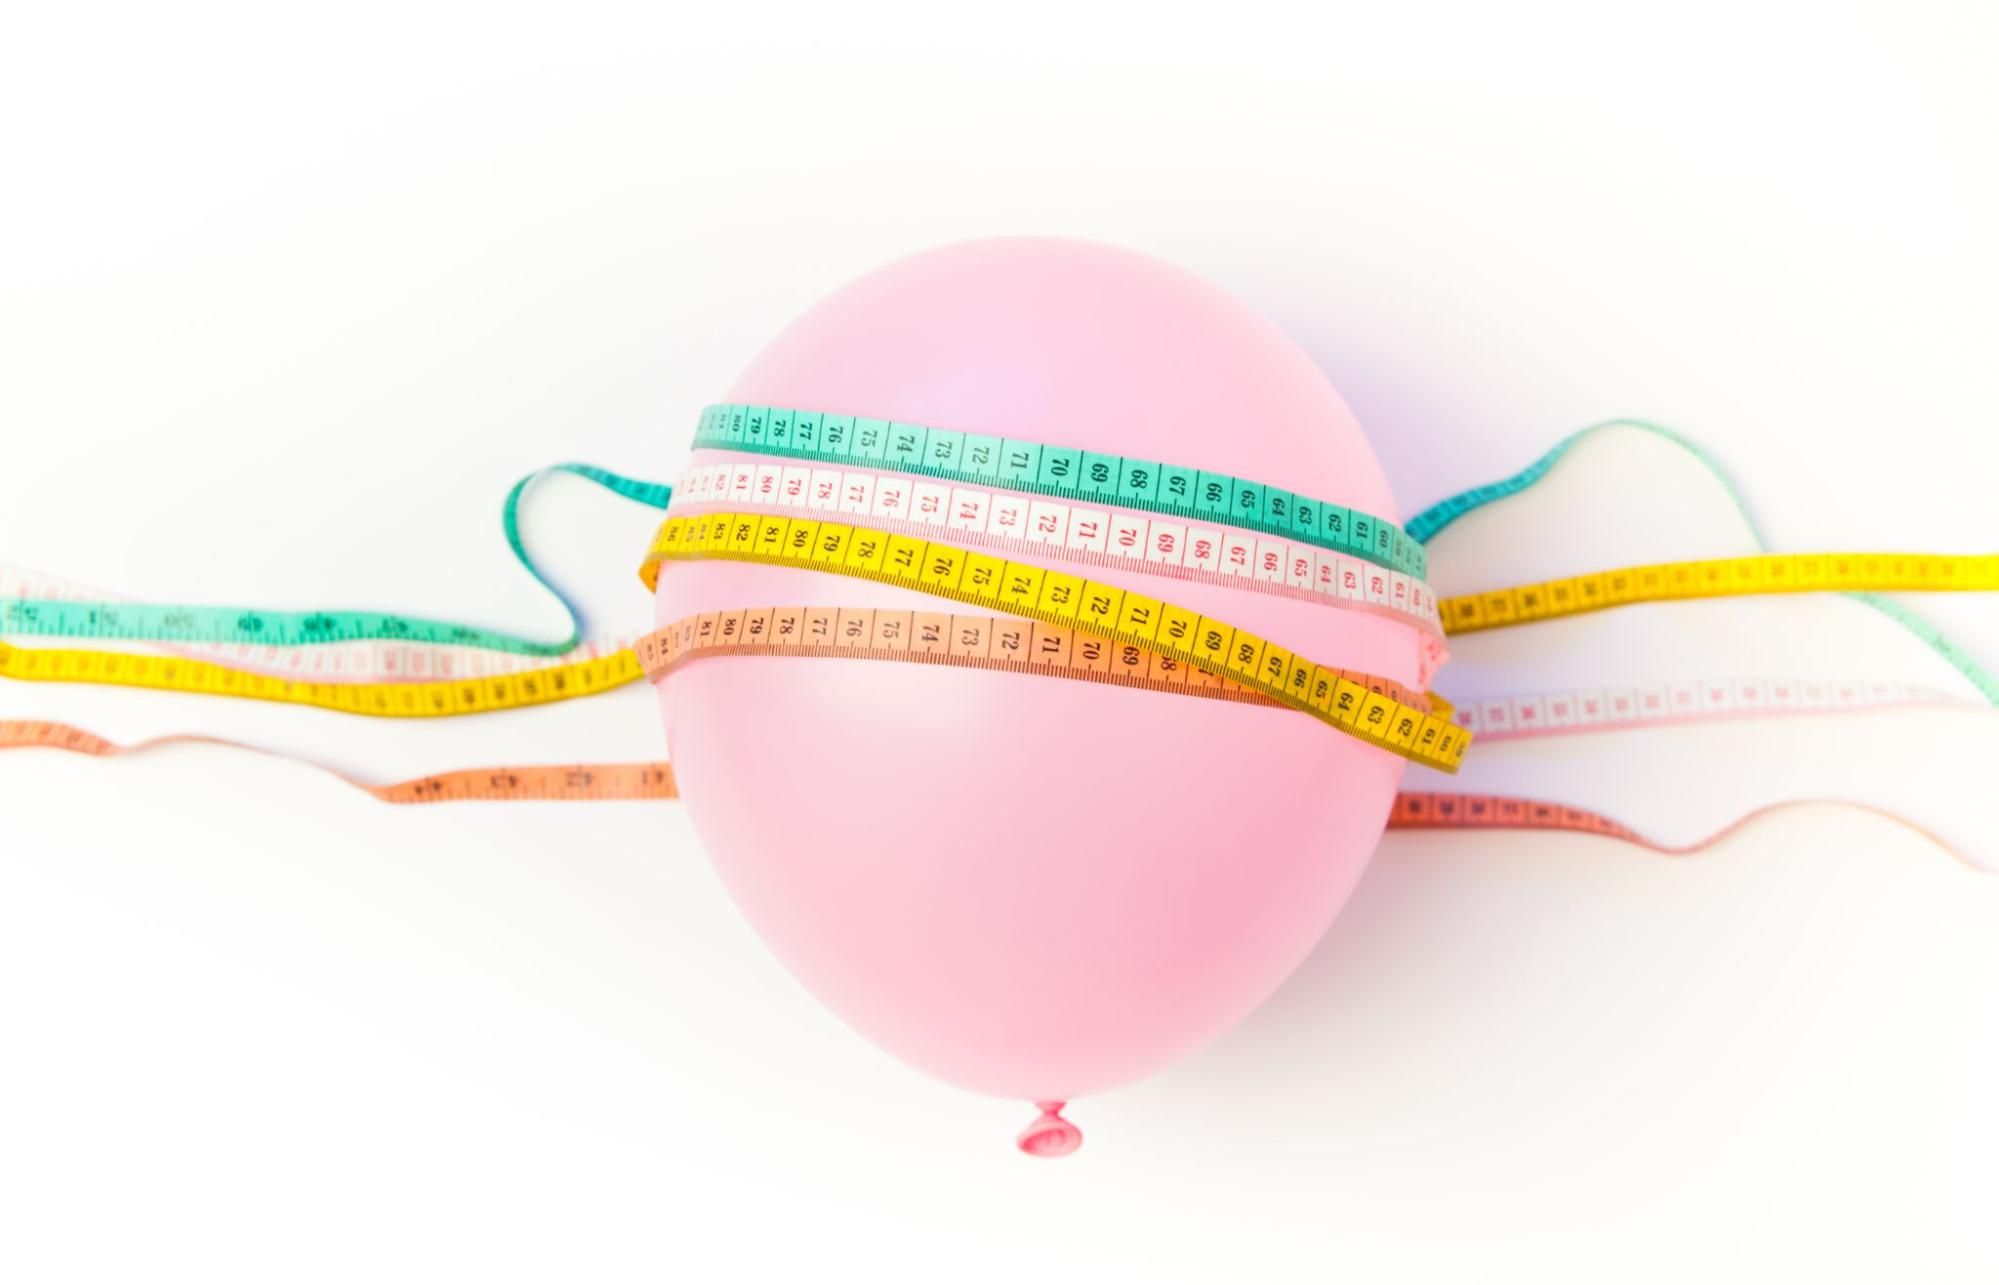 A pink balloon wrapped with multiple measuring tapes, symbolizing weight loss and measurement.